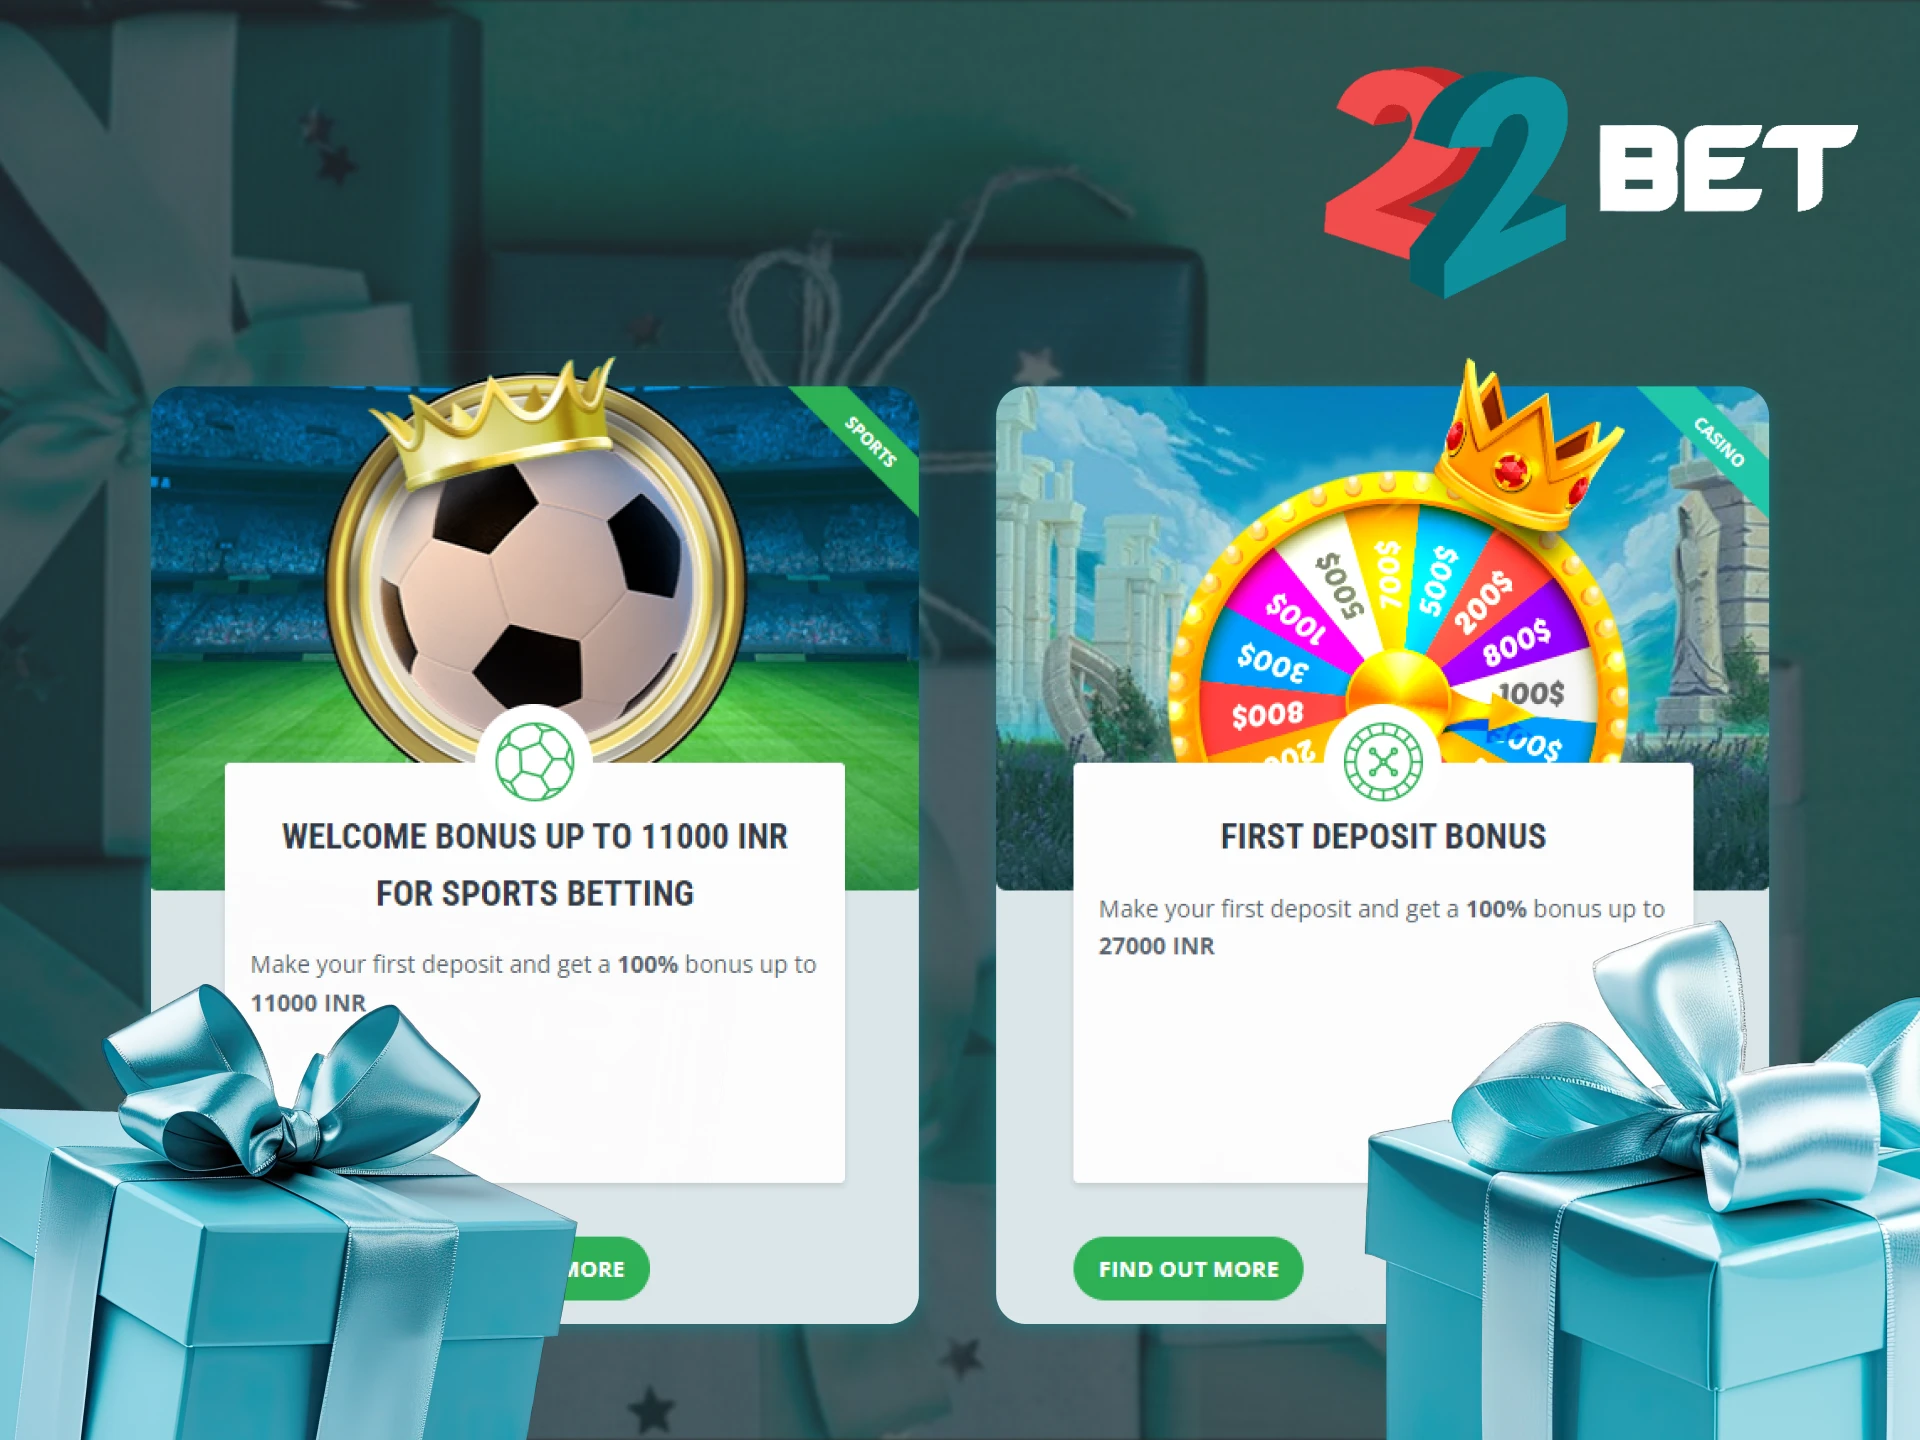 When you register with 22Bet, you can choose a sports or casino welcome bonus.